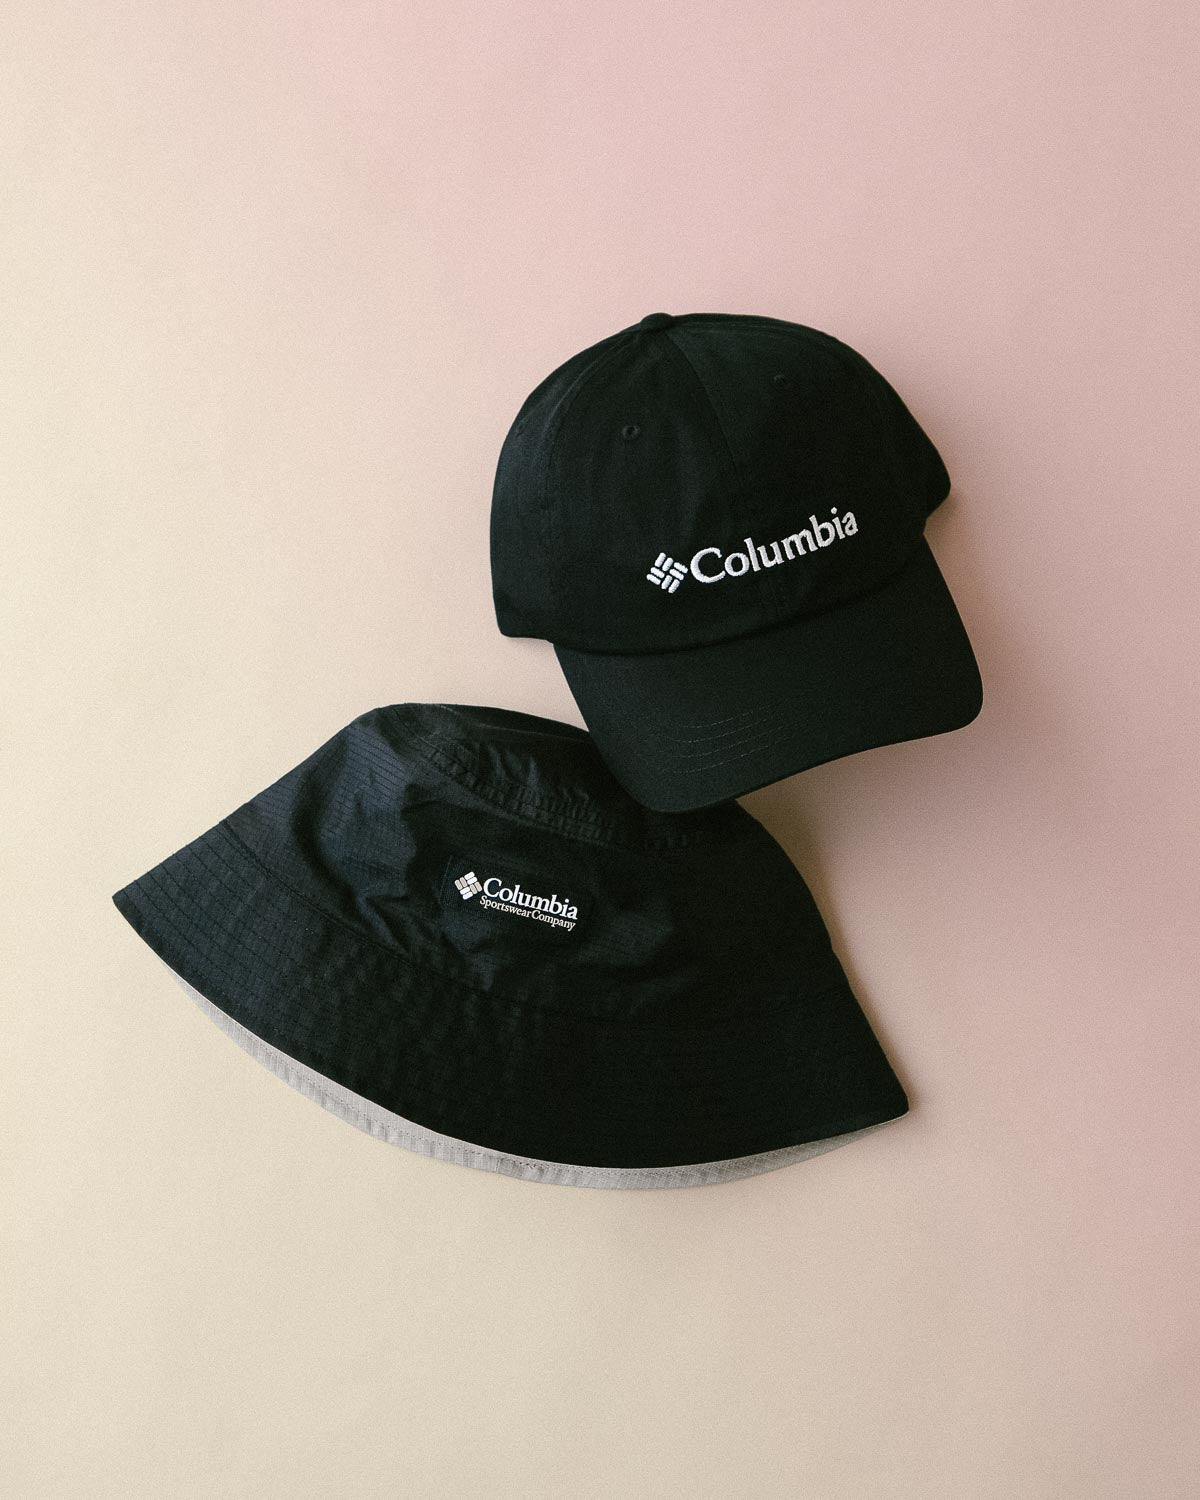 Introducing: Columbia | Aways in Colour